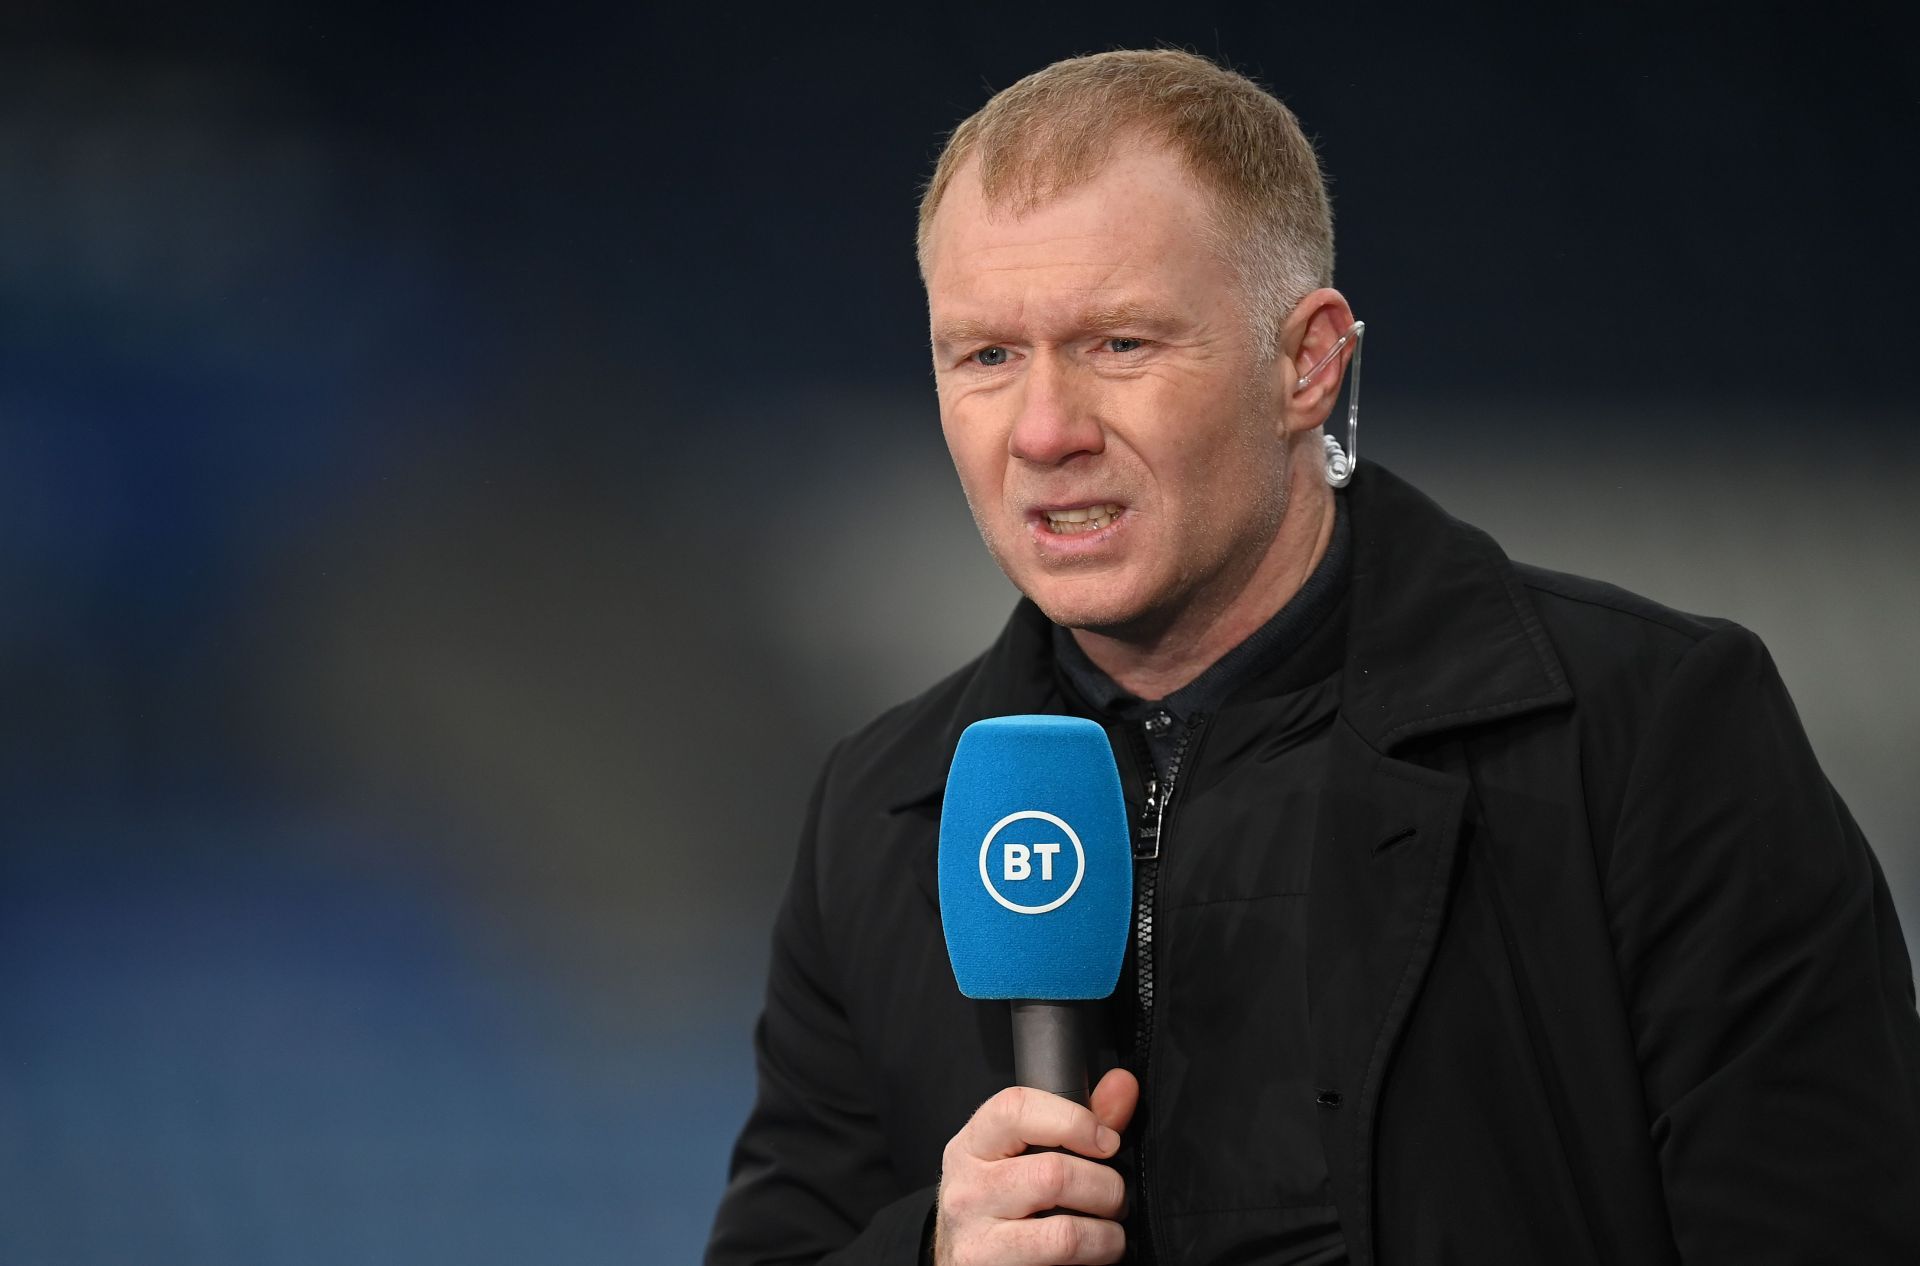 Paul Scholes believes Chelsea could fall behind Liverpool and Manchester City in the title race this season.